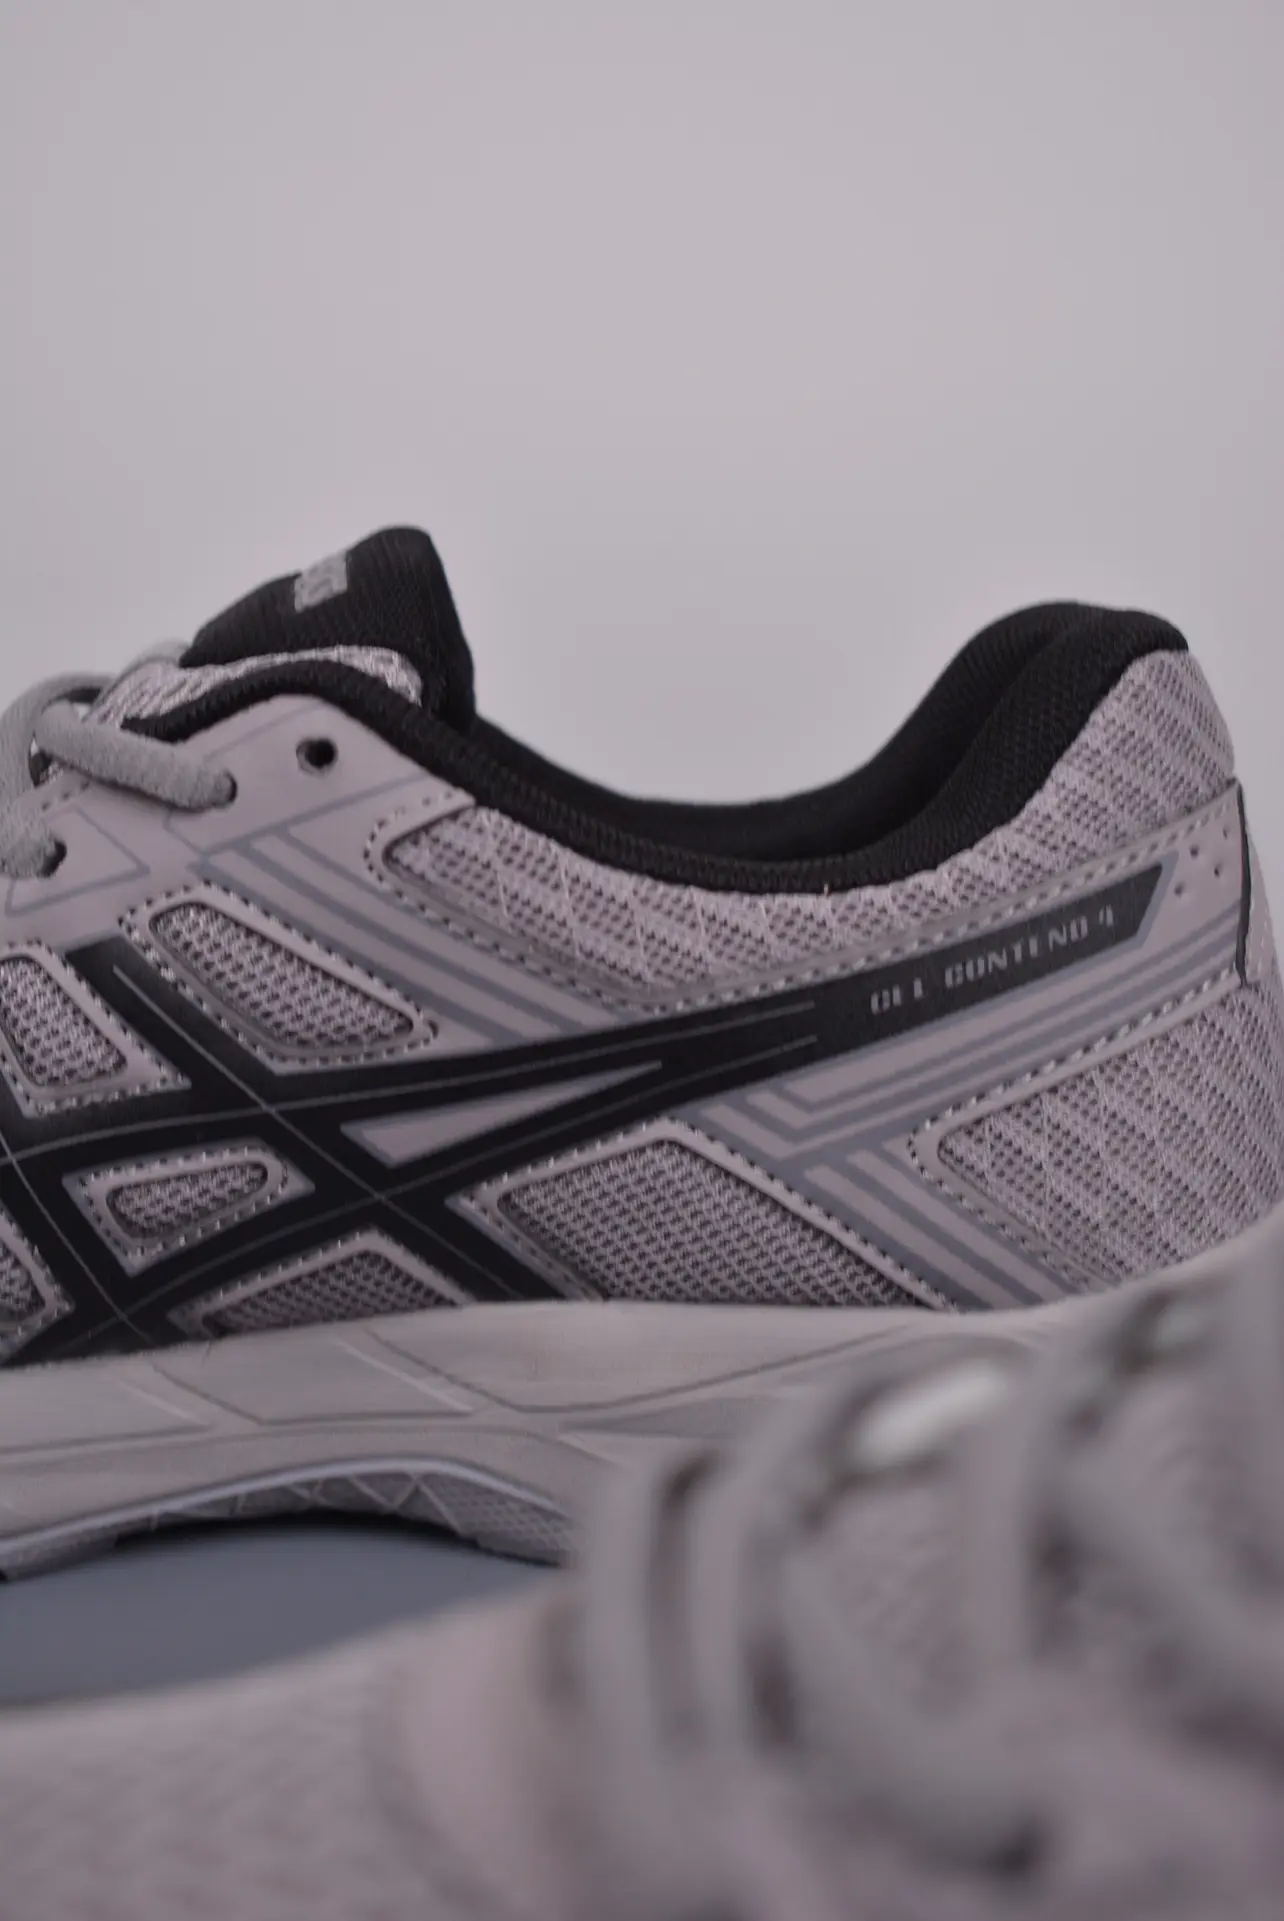 YASSW | ASICS Jolt 3 Running Shoes Review - Style, Comfort, Fit, and Performance